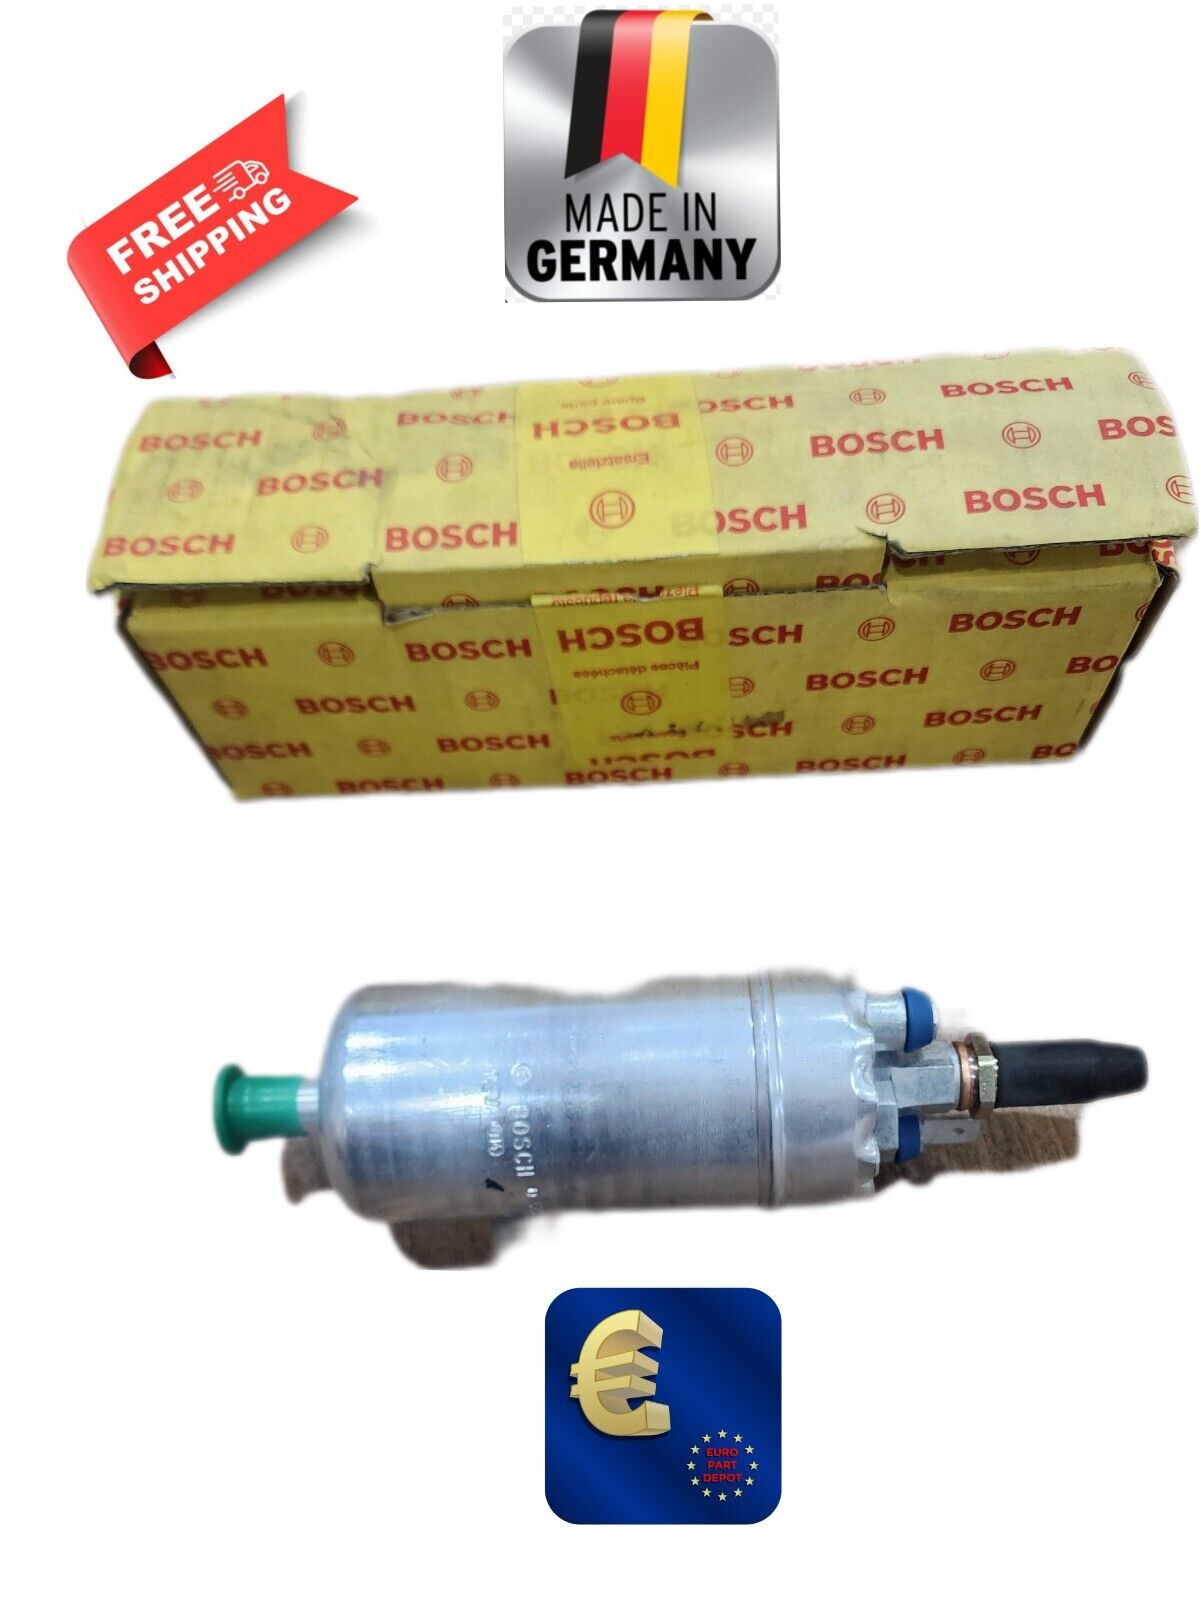 Out of Tank fuel pump for FIAT Uno Turbo ie 1.4 - Year 89-93